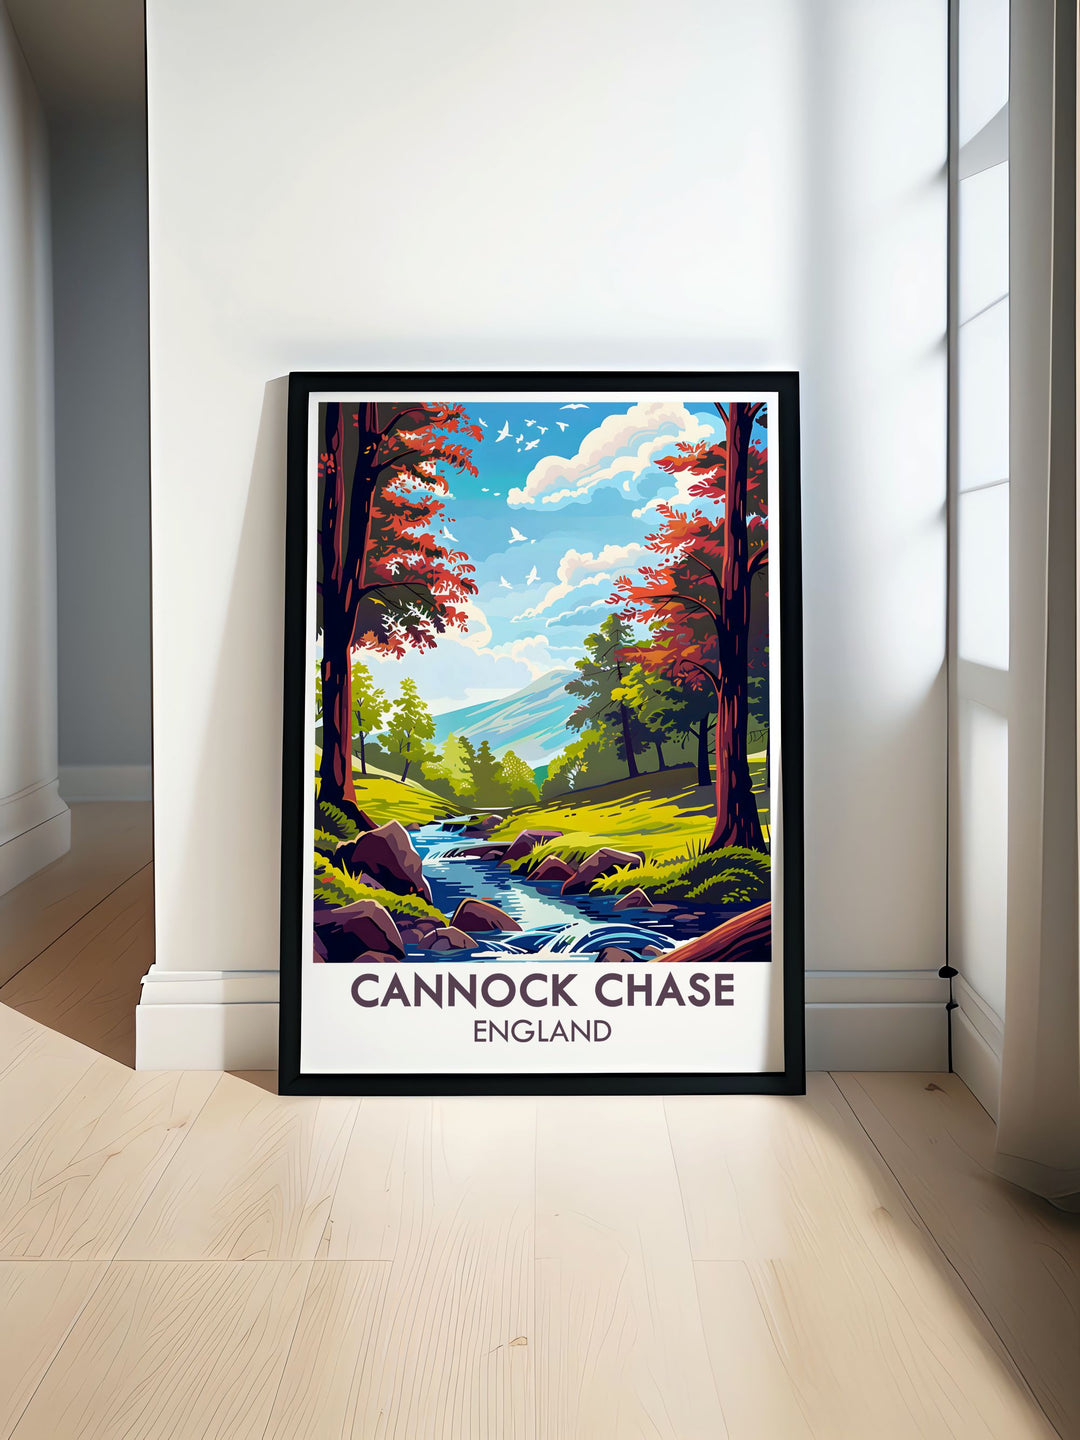 Sherbrook Valley is a stunning depiction of Cannock Chase in Staffordshire perfect for nature lovers. This print captures the essence of the English countryside featuring lush greenery and diverse wildlife. An ideal gift for outdoor enthusiasts and lovers of British nature.